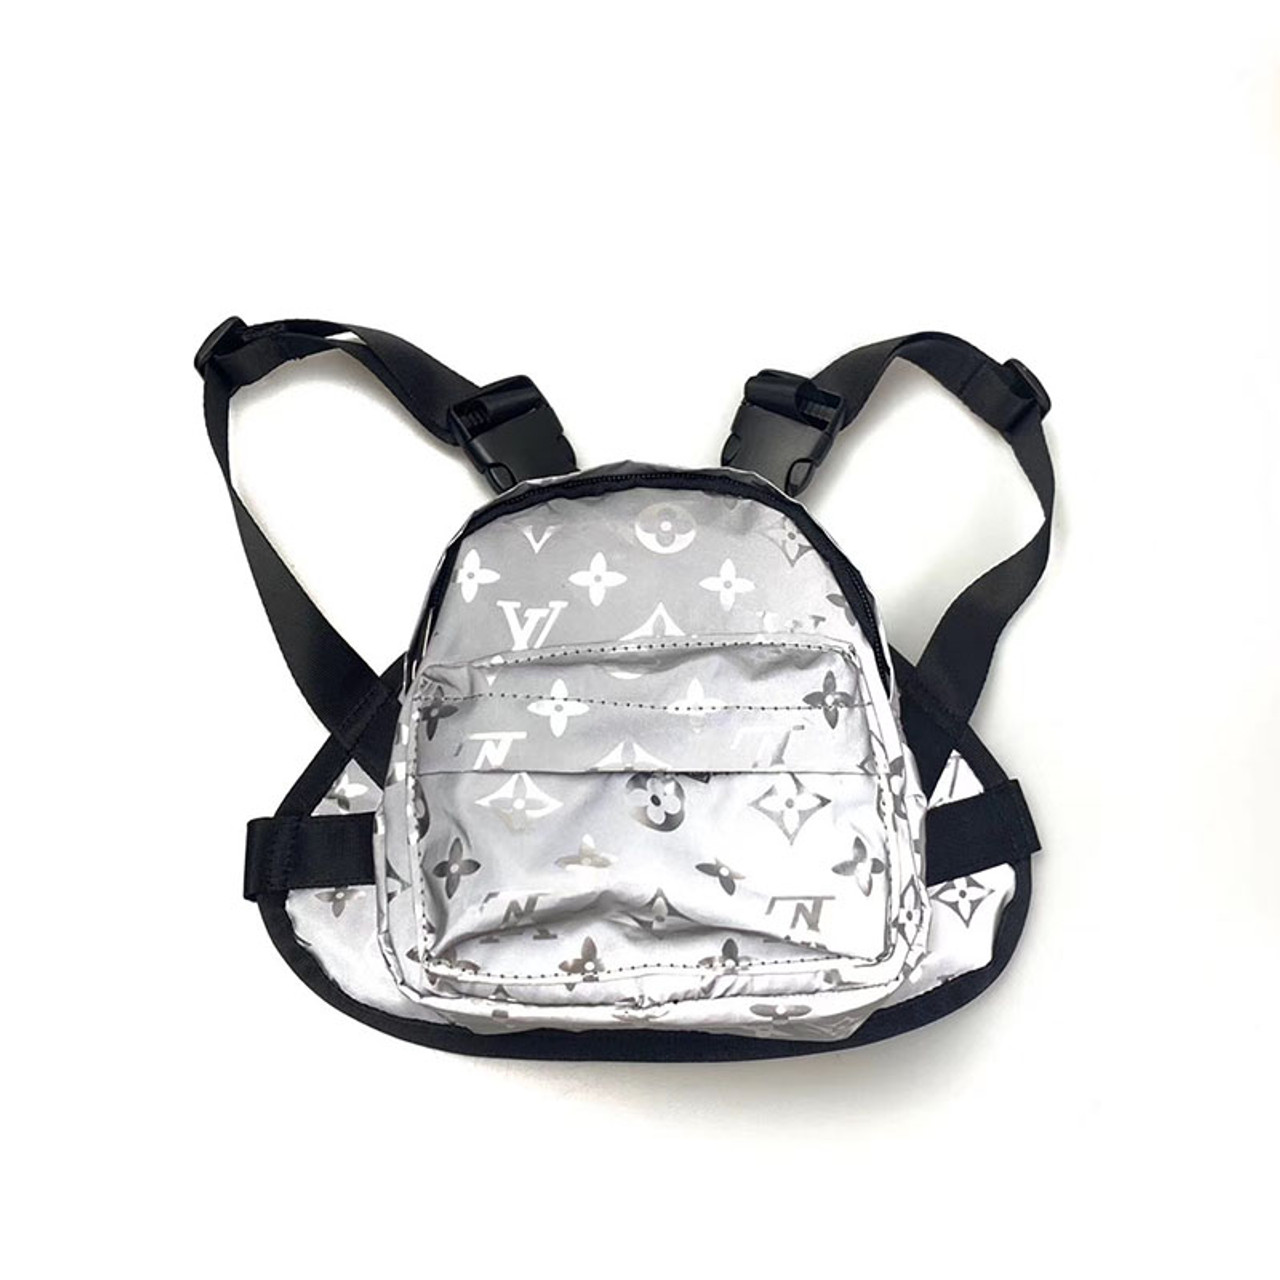 Chewy Vuitton Reflective Dog Backpack